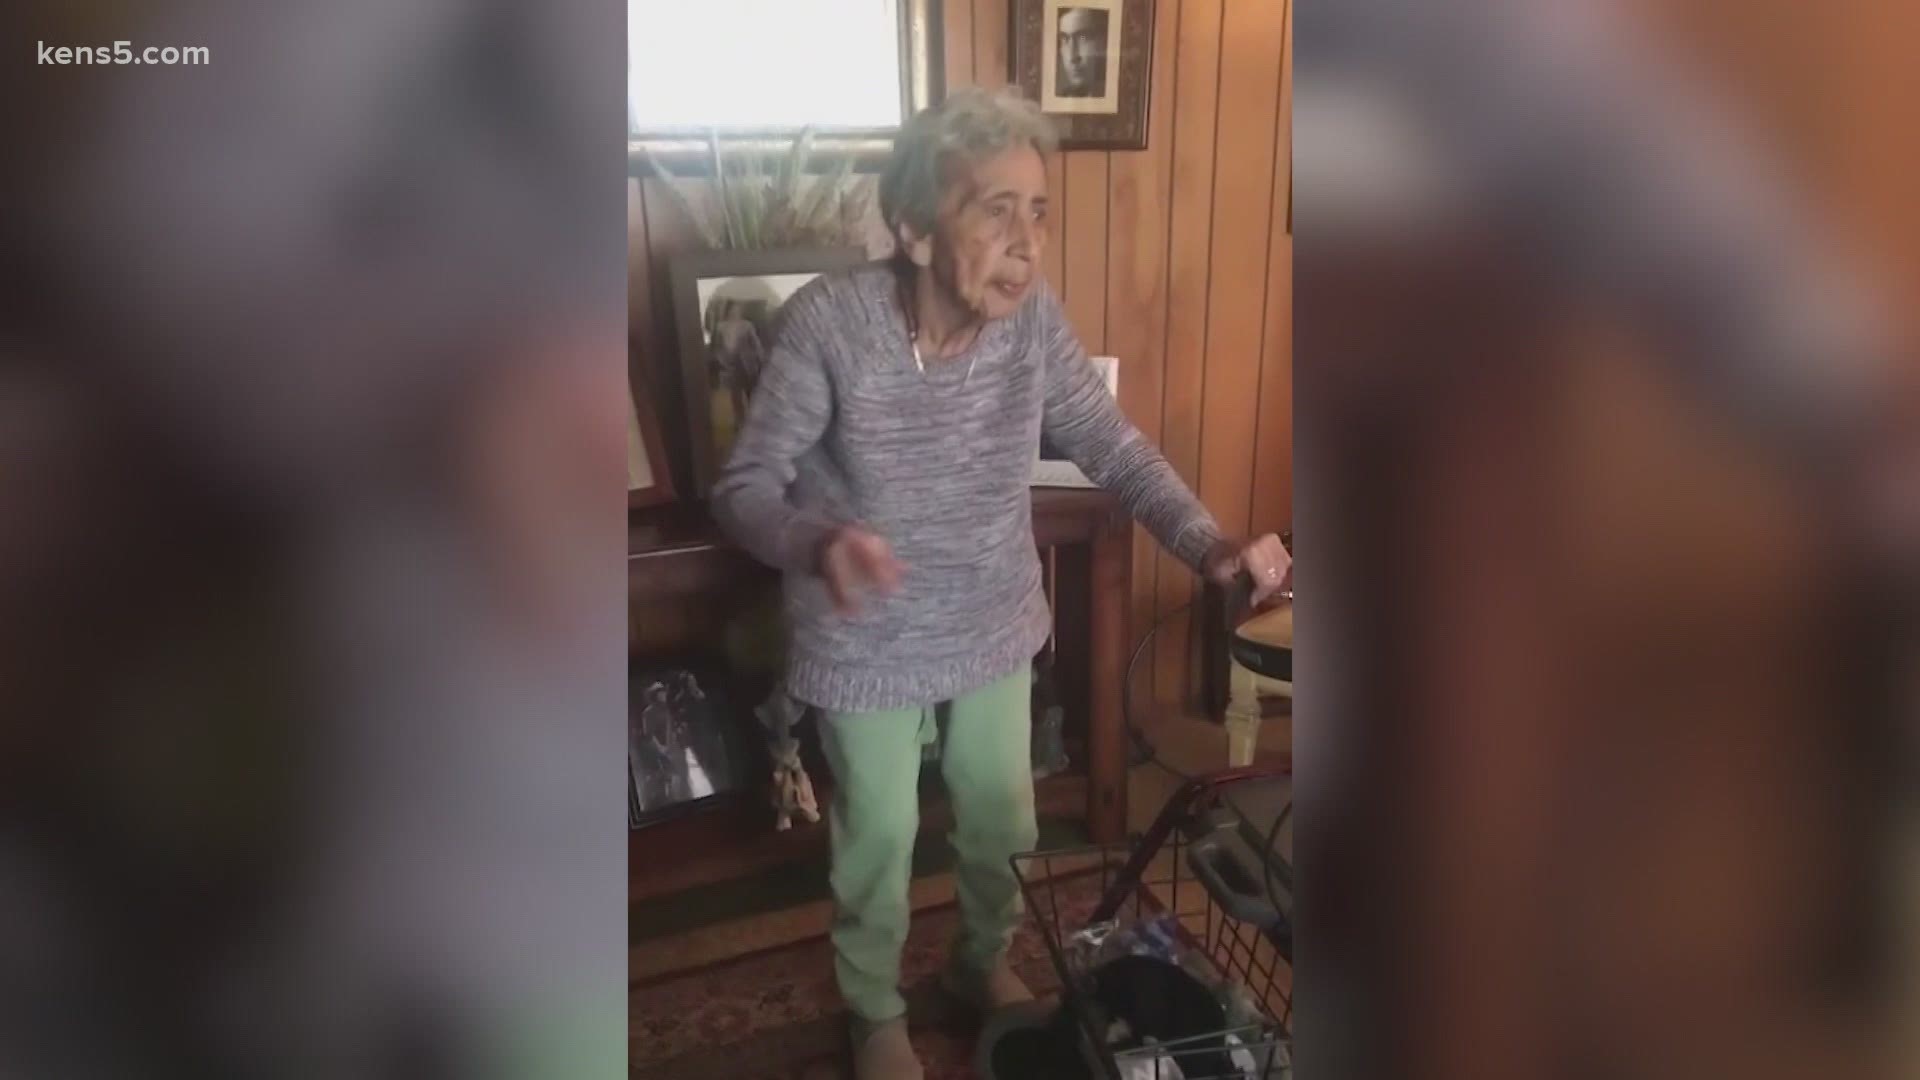 You never ever have to stop busting moves. In the video, Rosie Kutch from Lytle is just grooving to the music. Happy Mother's Day!